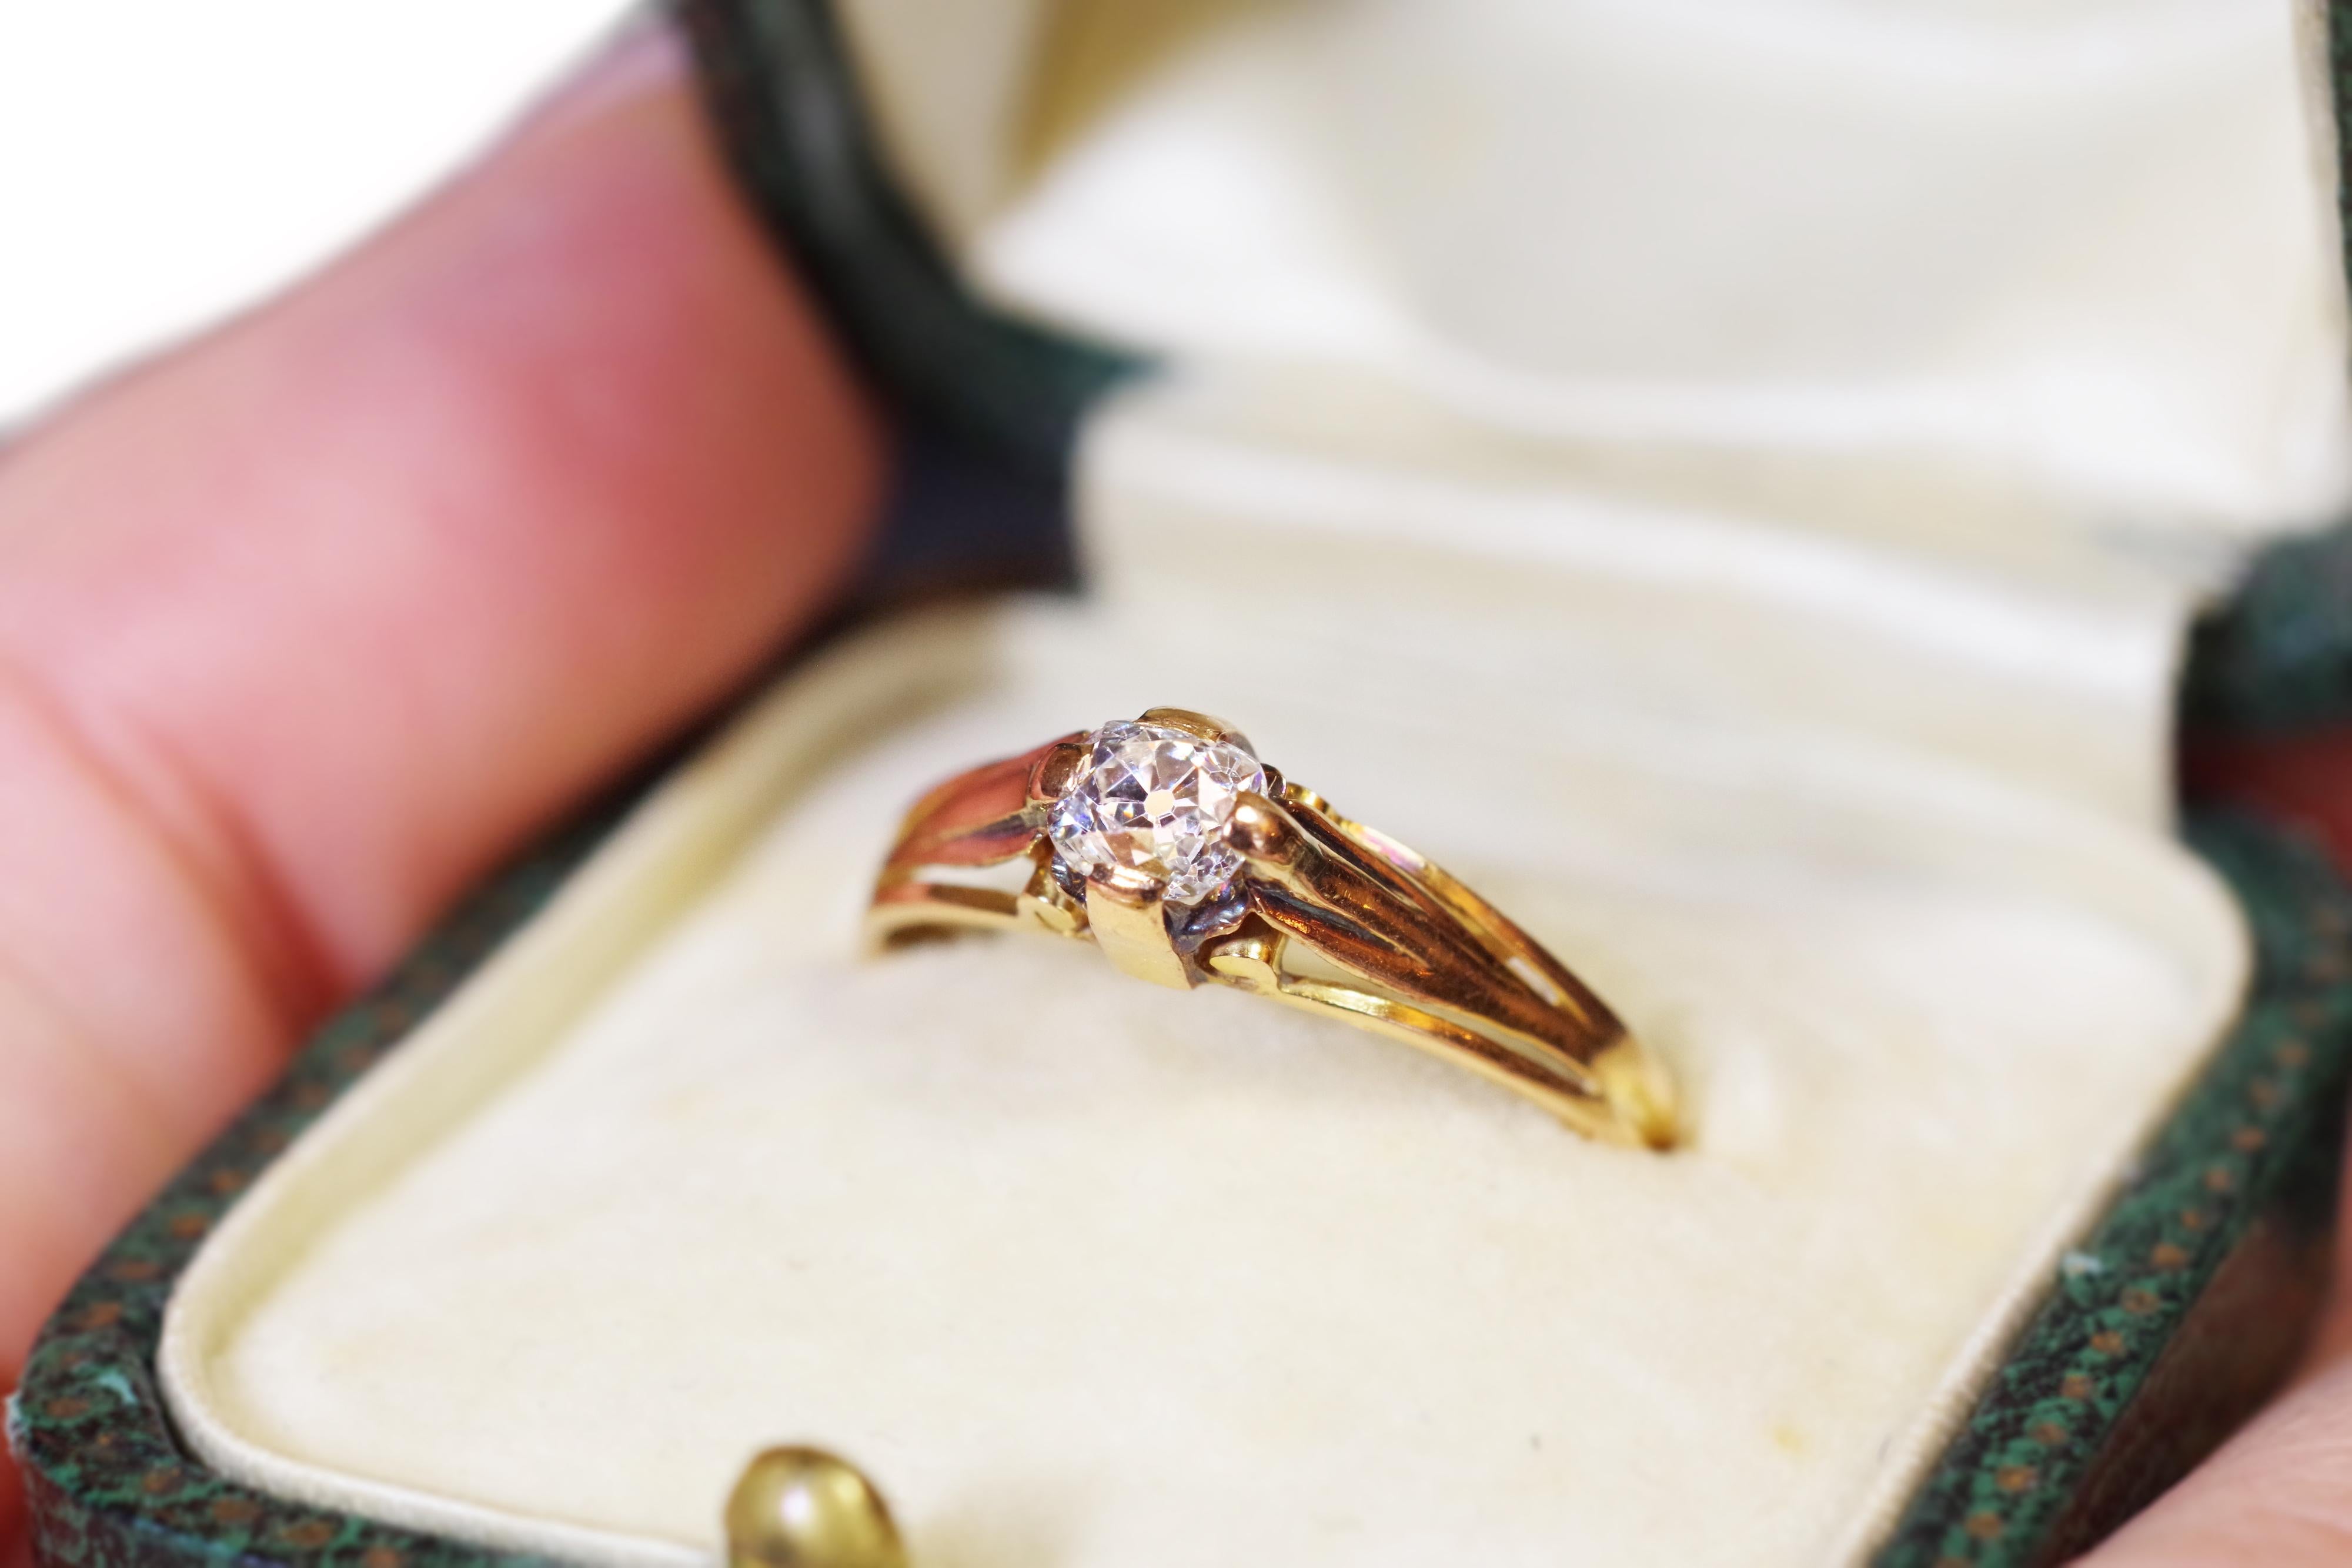 Antique Victorian solitaire diamond ring in 18 karat pink gold. Engagement ring with an old mine cut diamond of ovale form with for large claws. Shoulders with three strands and small volutes under the diamond. Antique solitaire diamond ring, late